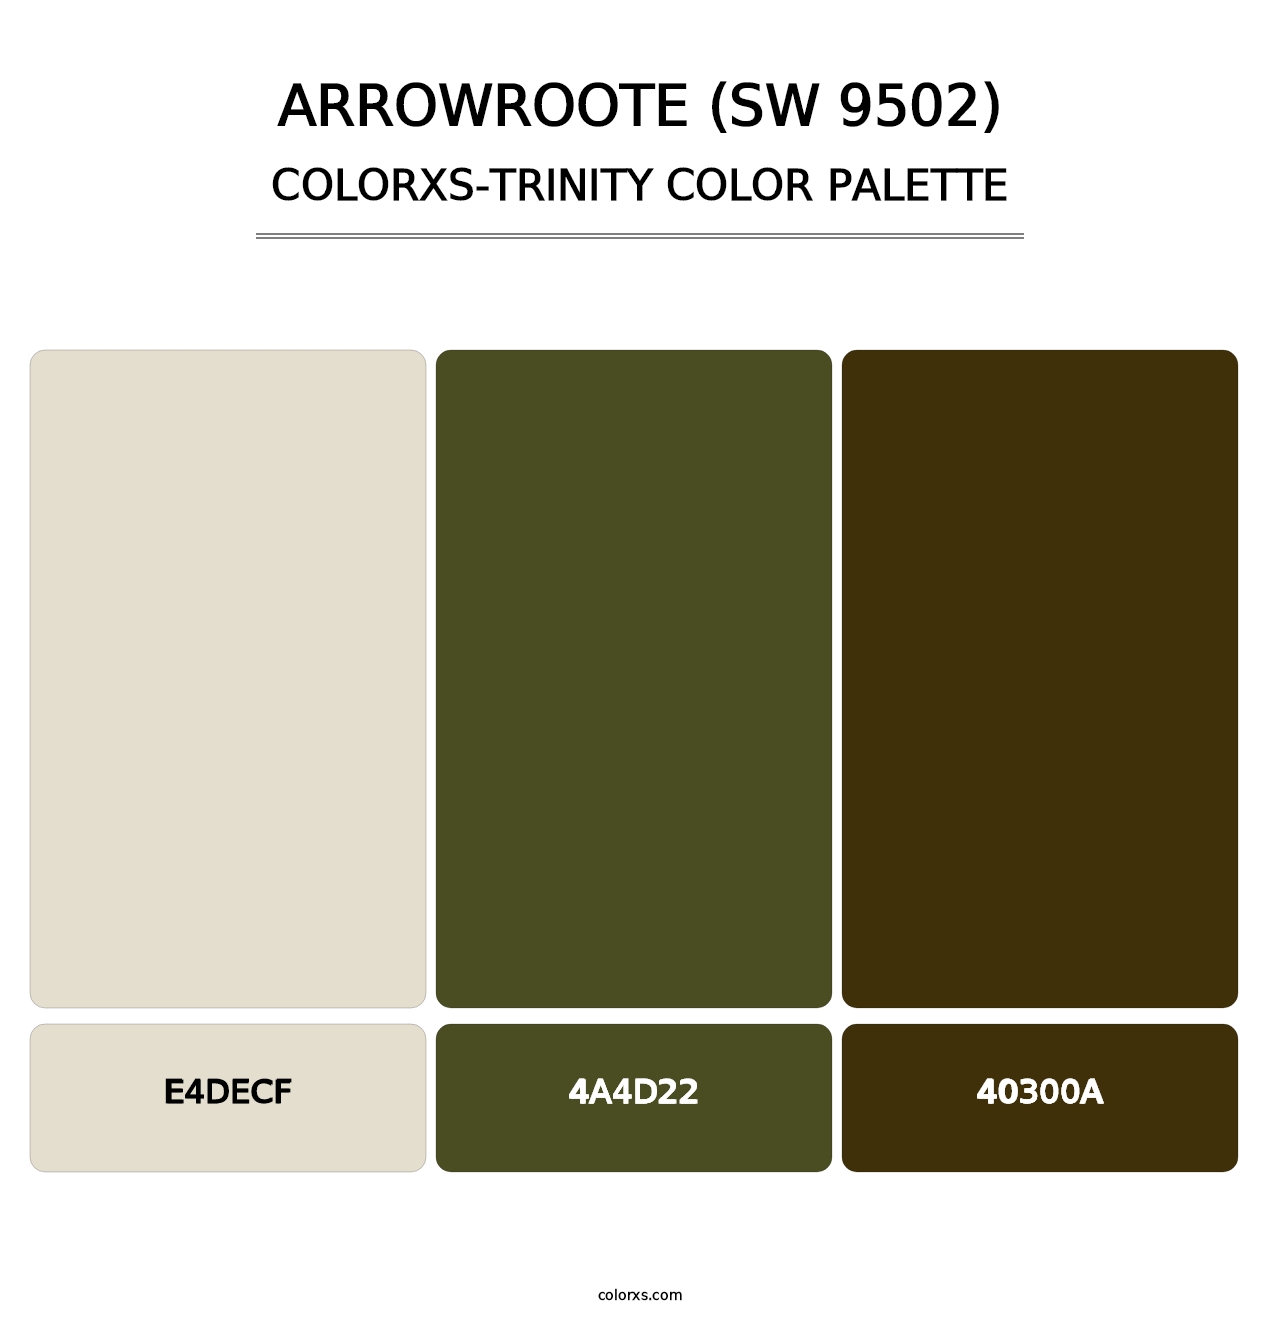 Arrowroote (SW 9502) - Colorxs Trinity Palette